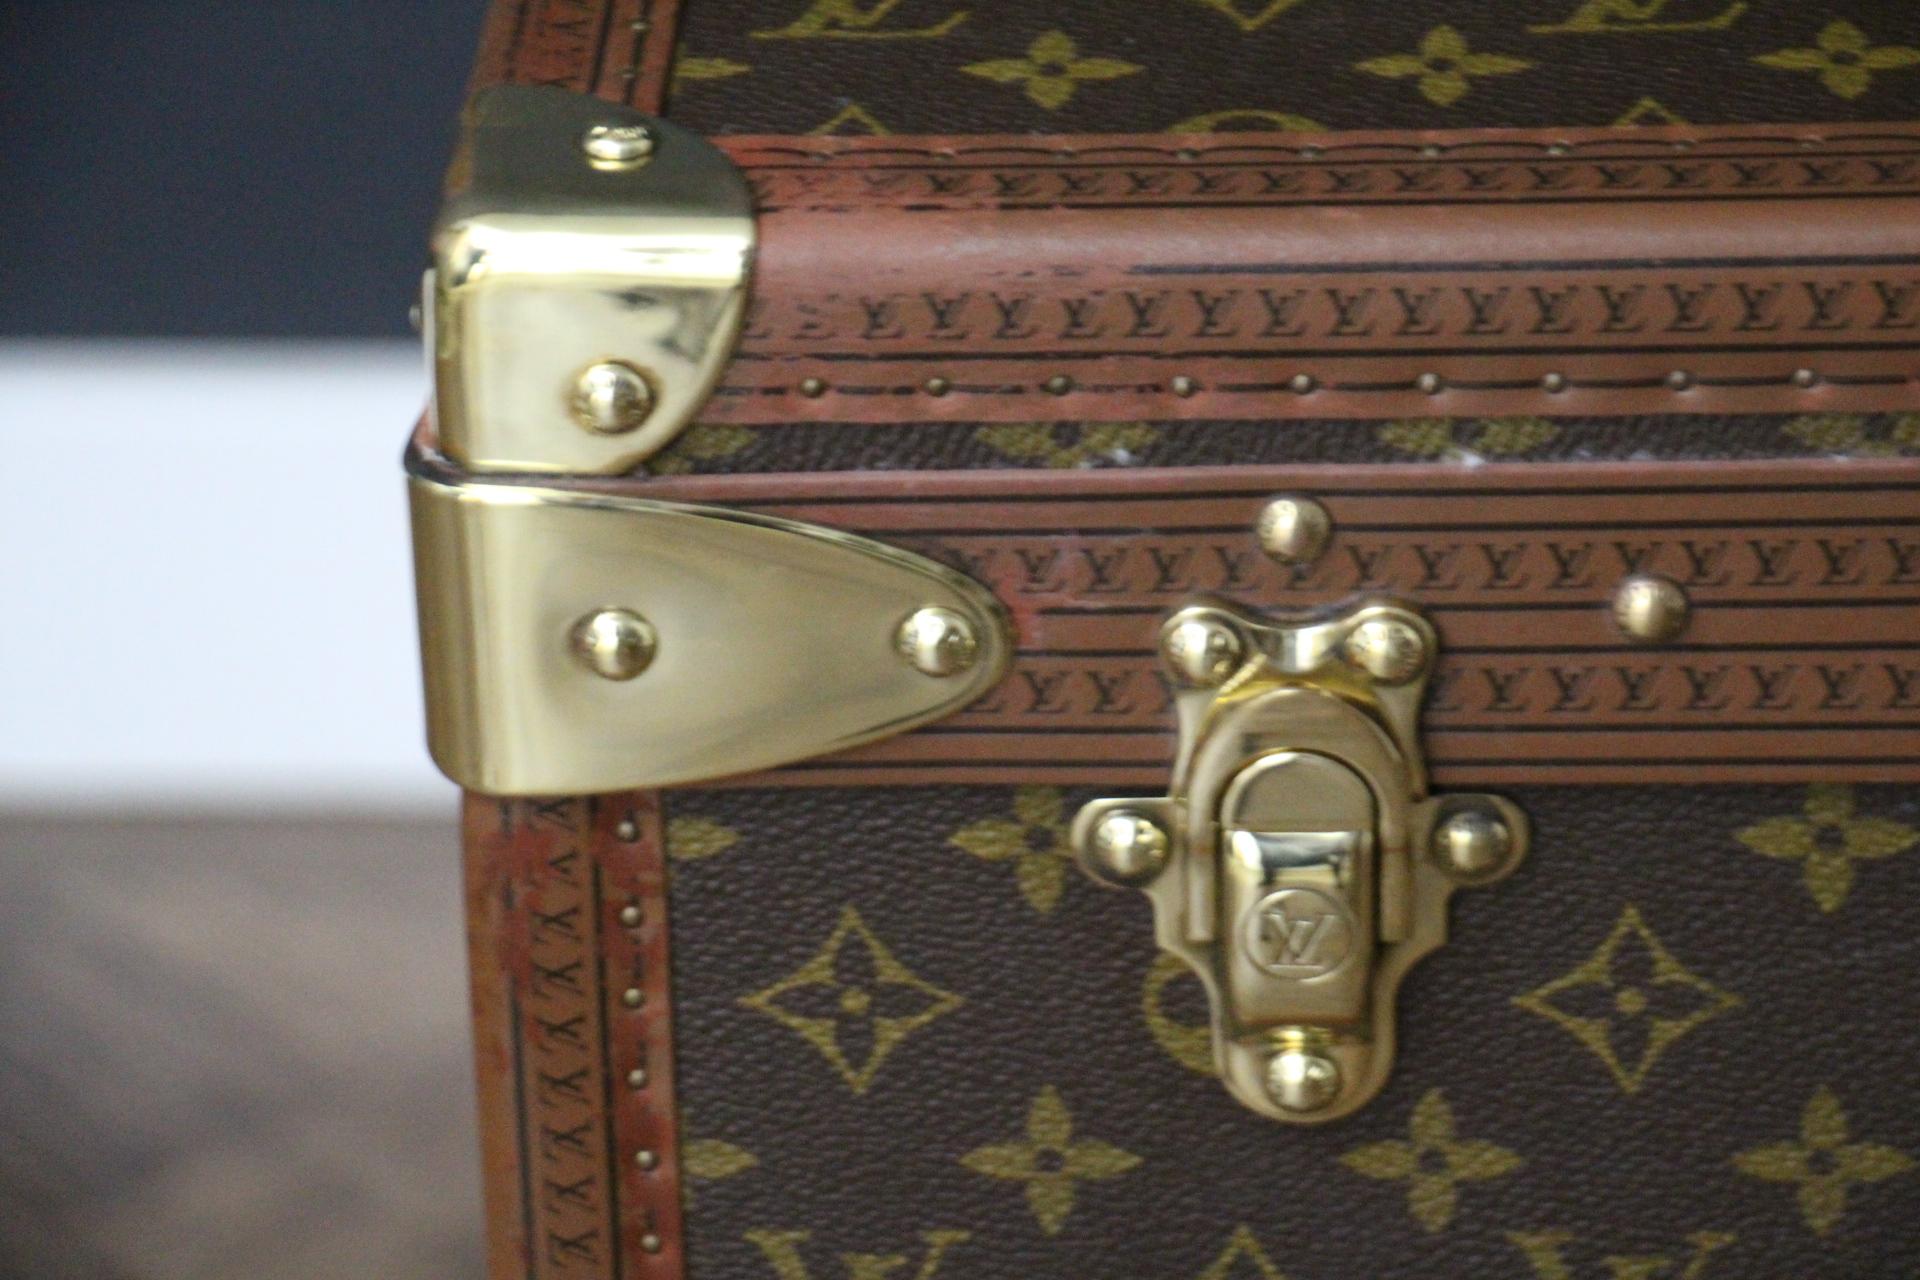 This piece of luggage is a magnificent Louis Vuitton Alzer monogramm suitcase. This 80 cm suitcase is the largest and the most luxury one made by Louis Vuitton. It features all Louis Vuitton stamped solid brass fittings: locks, clasps and studs.